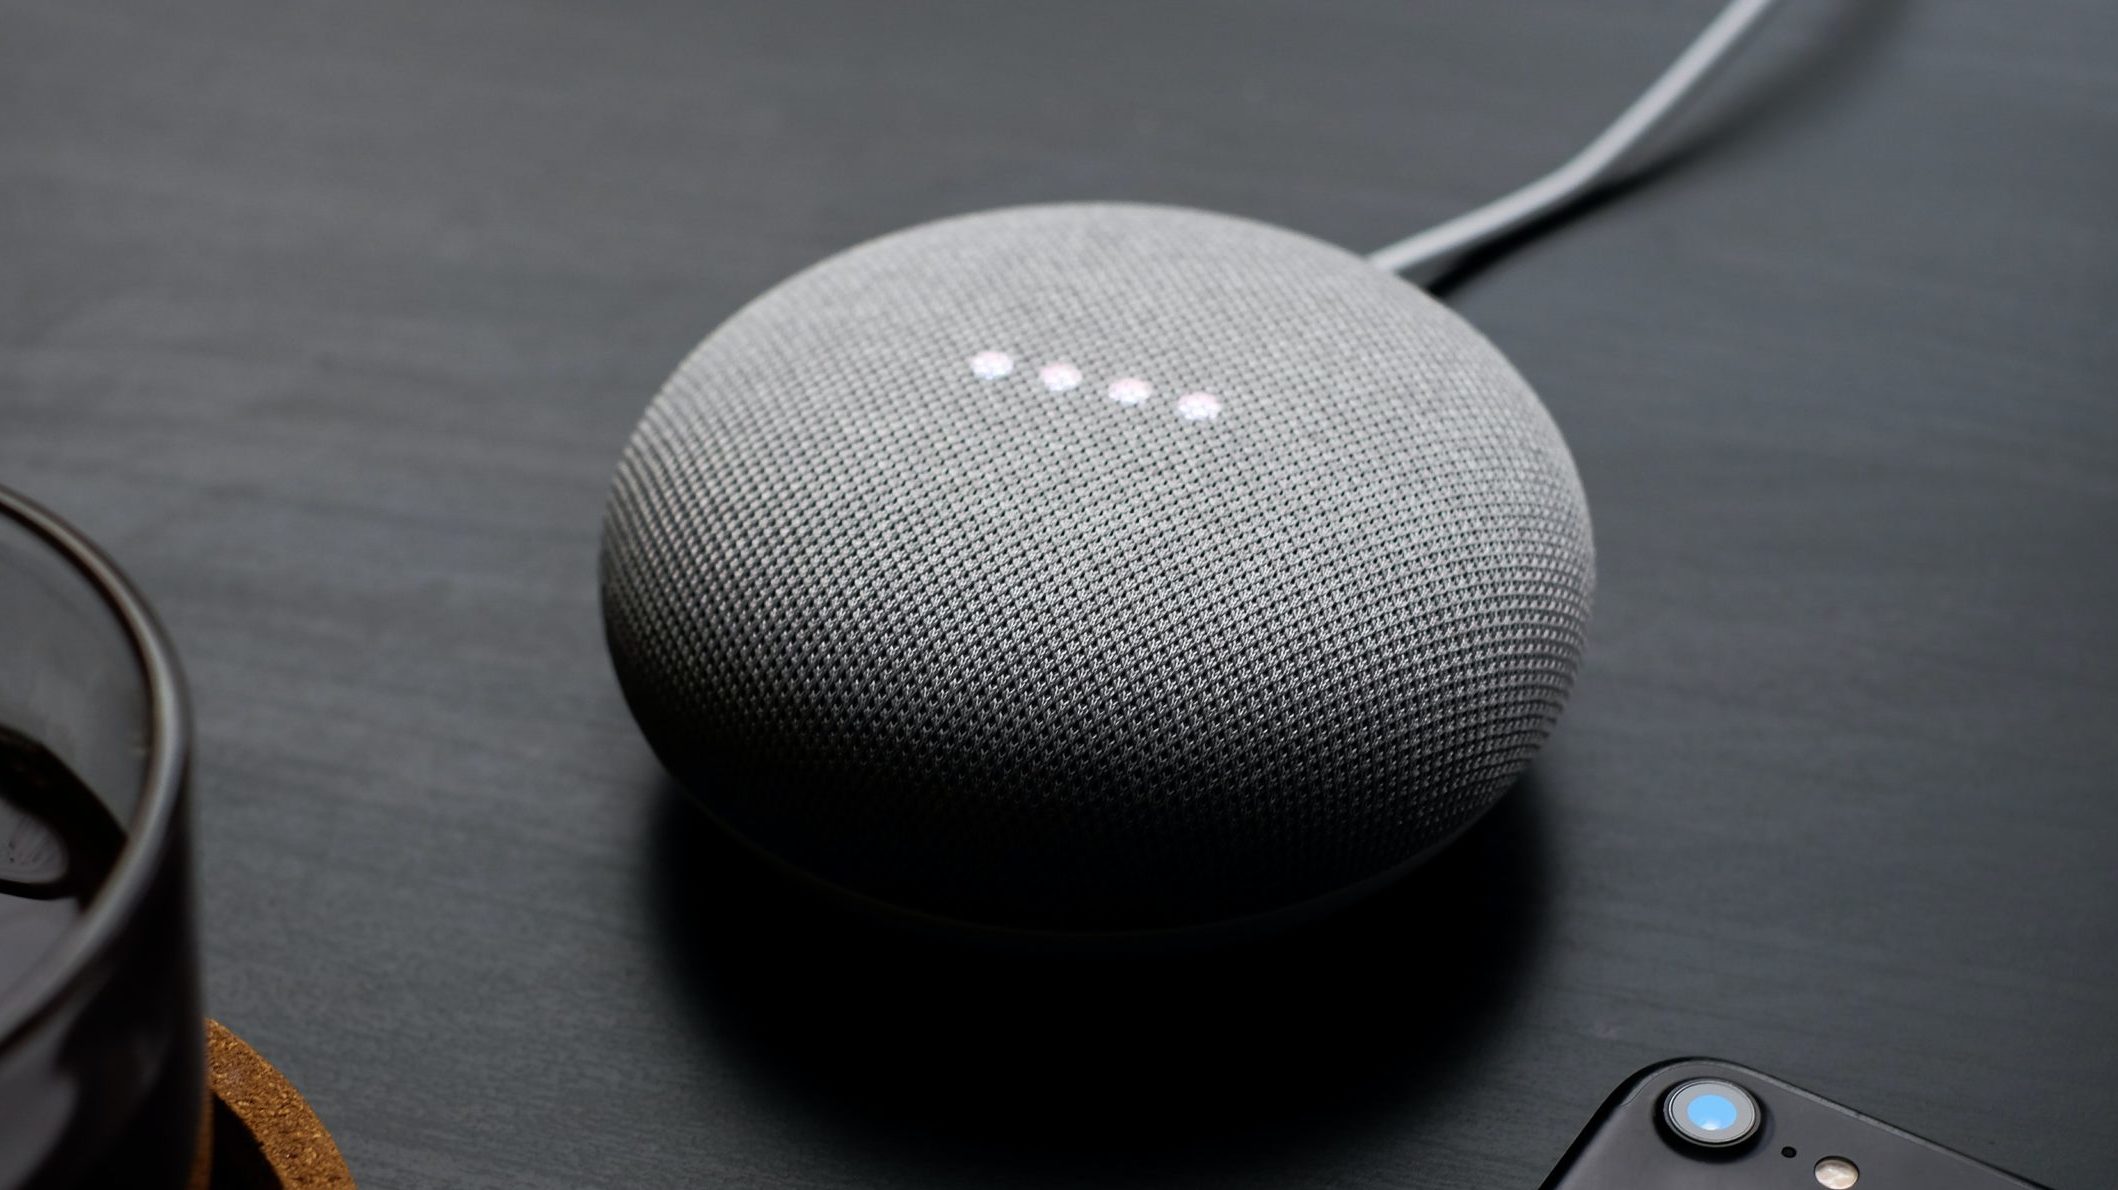 What Can A Google Home Do